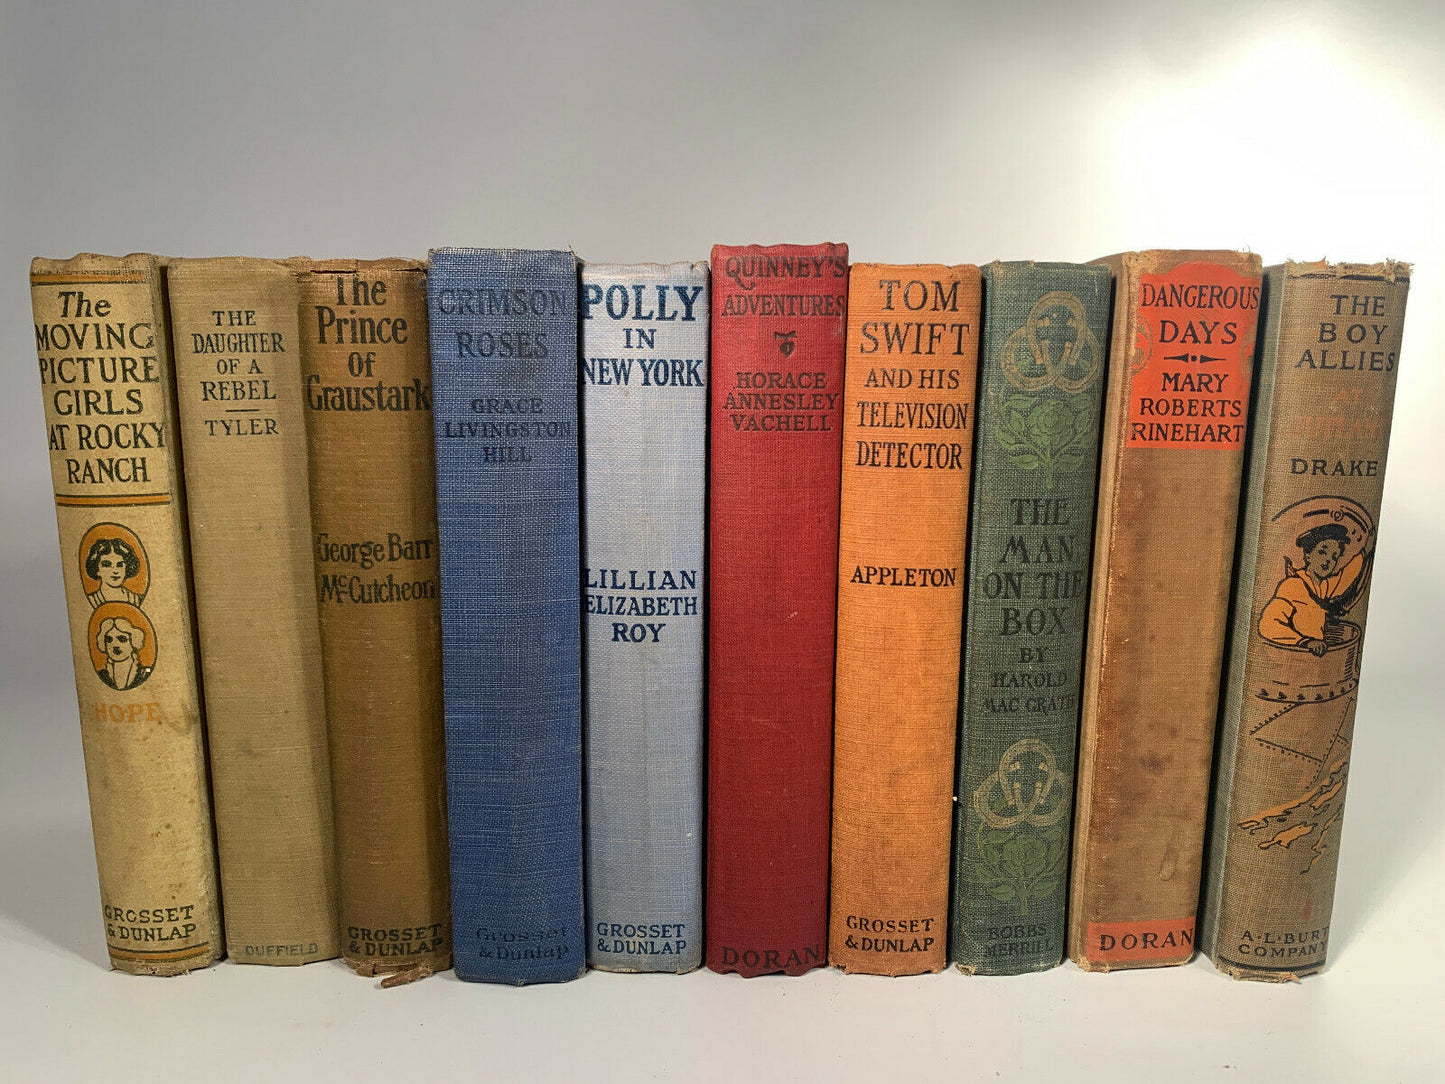 Antique 10 Book Lot, Tom Swift, Polly, Moving Picture Girls and more. Hardcover